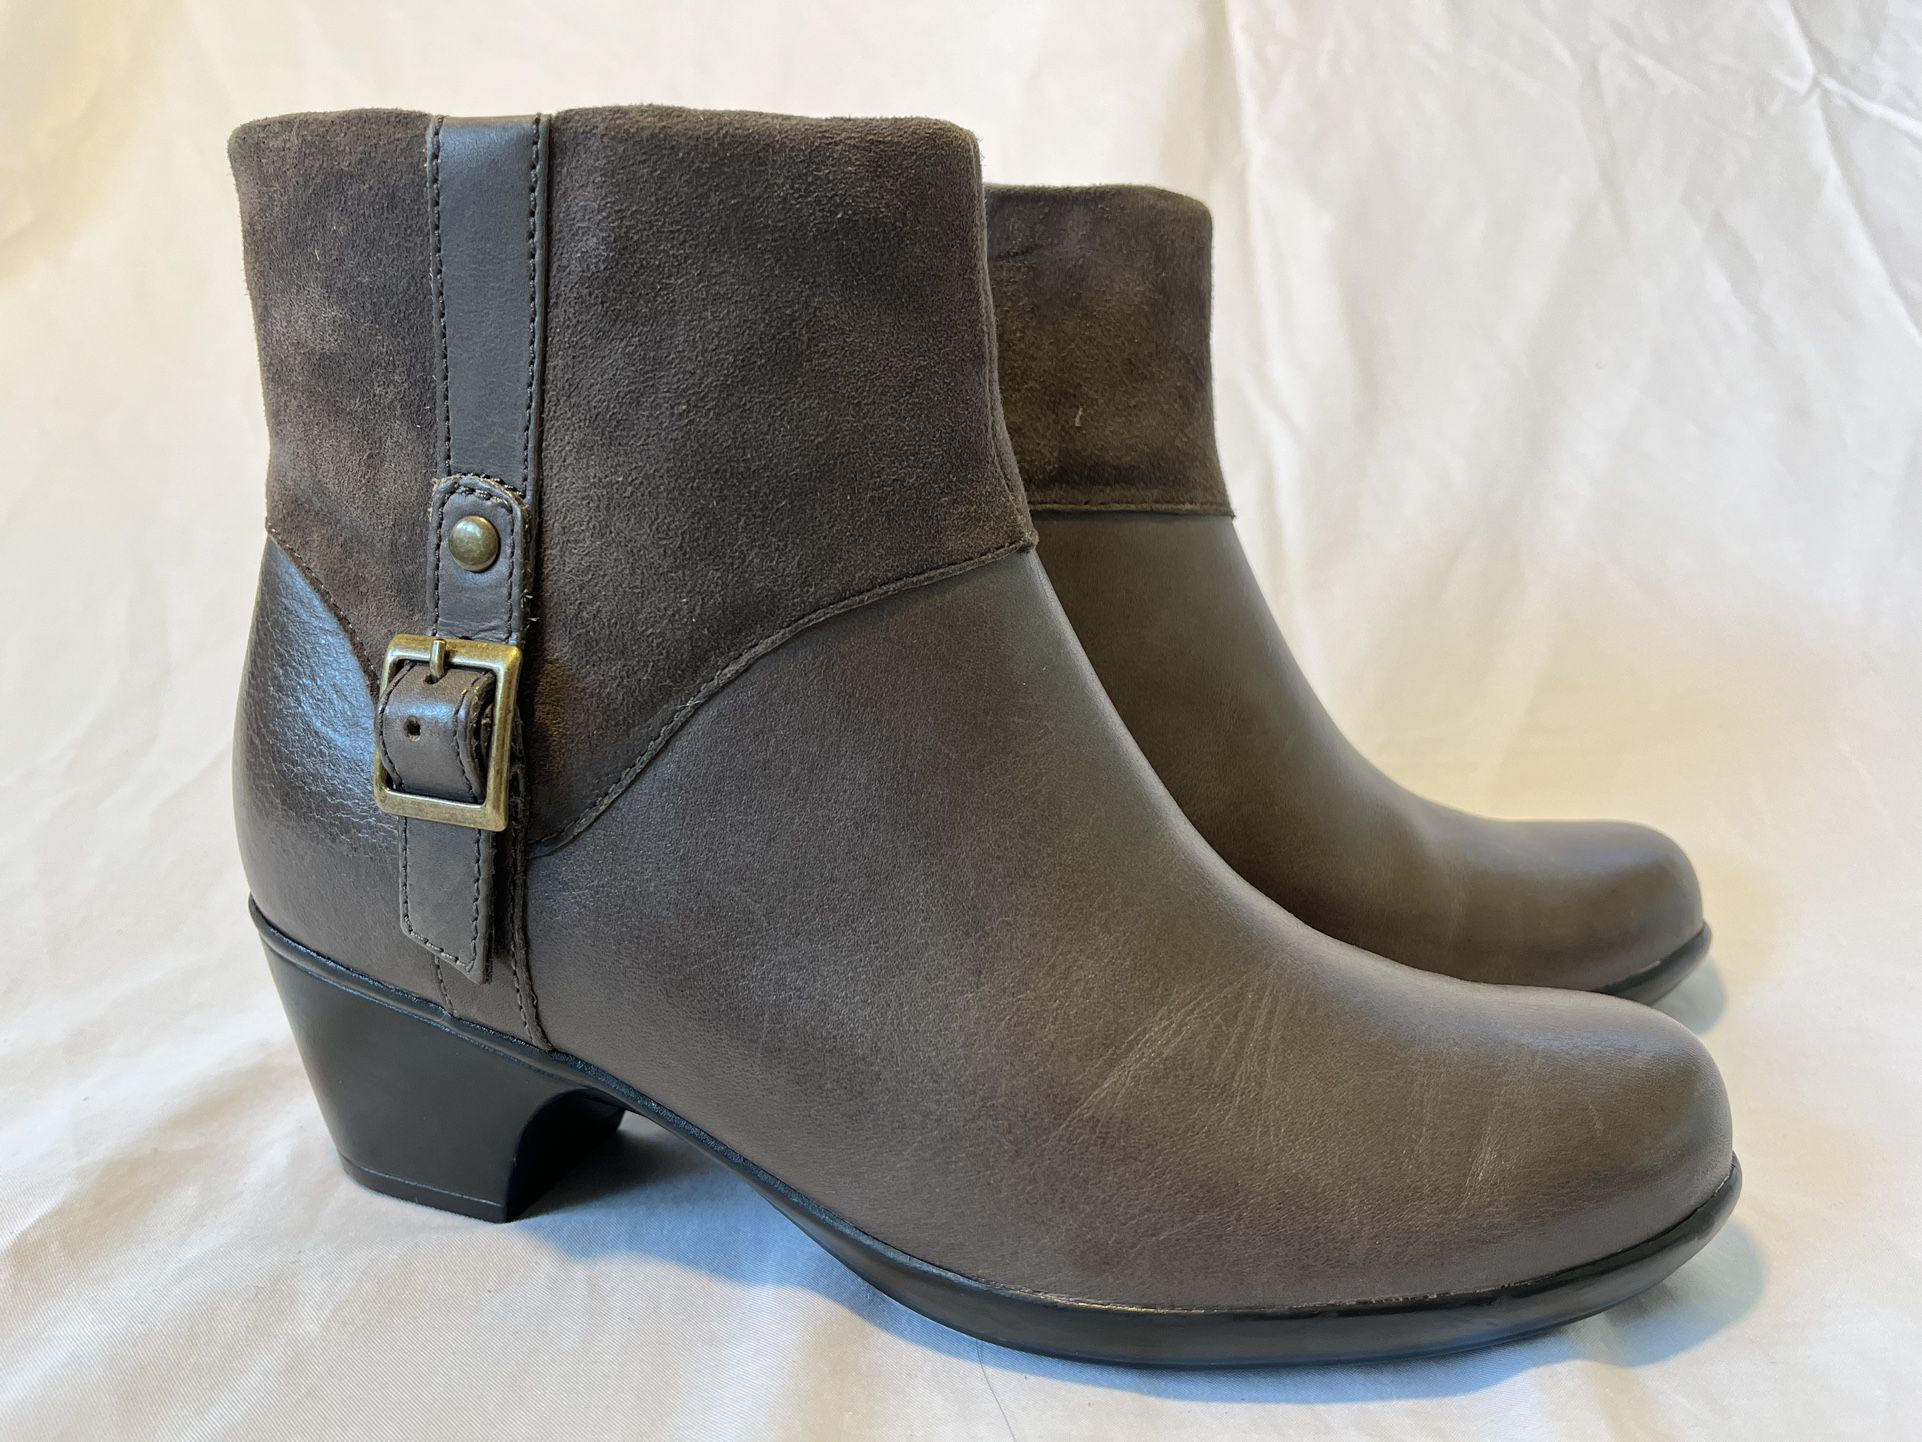 Clarks / Women Boots ankle / Leather / Suede / 